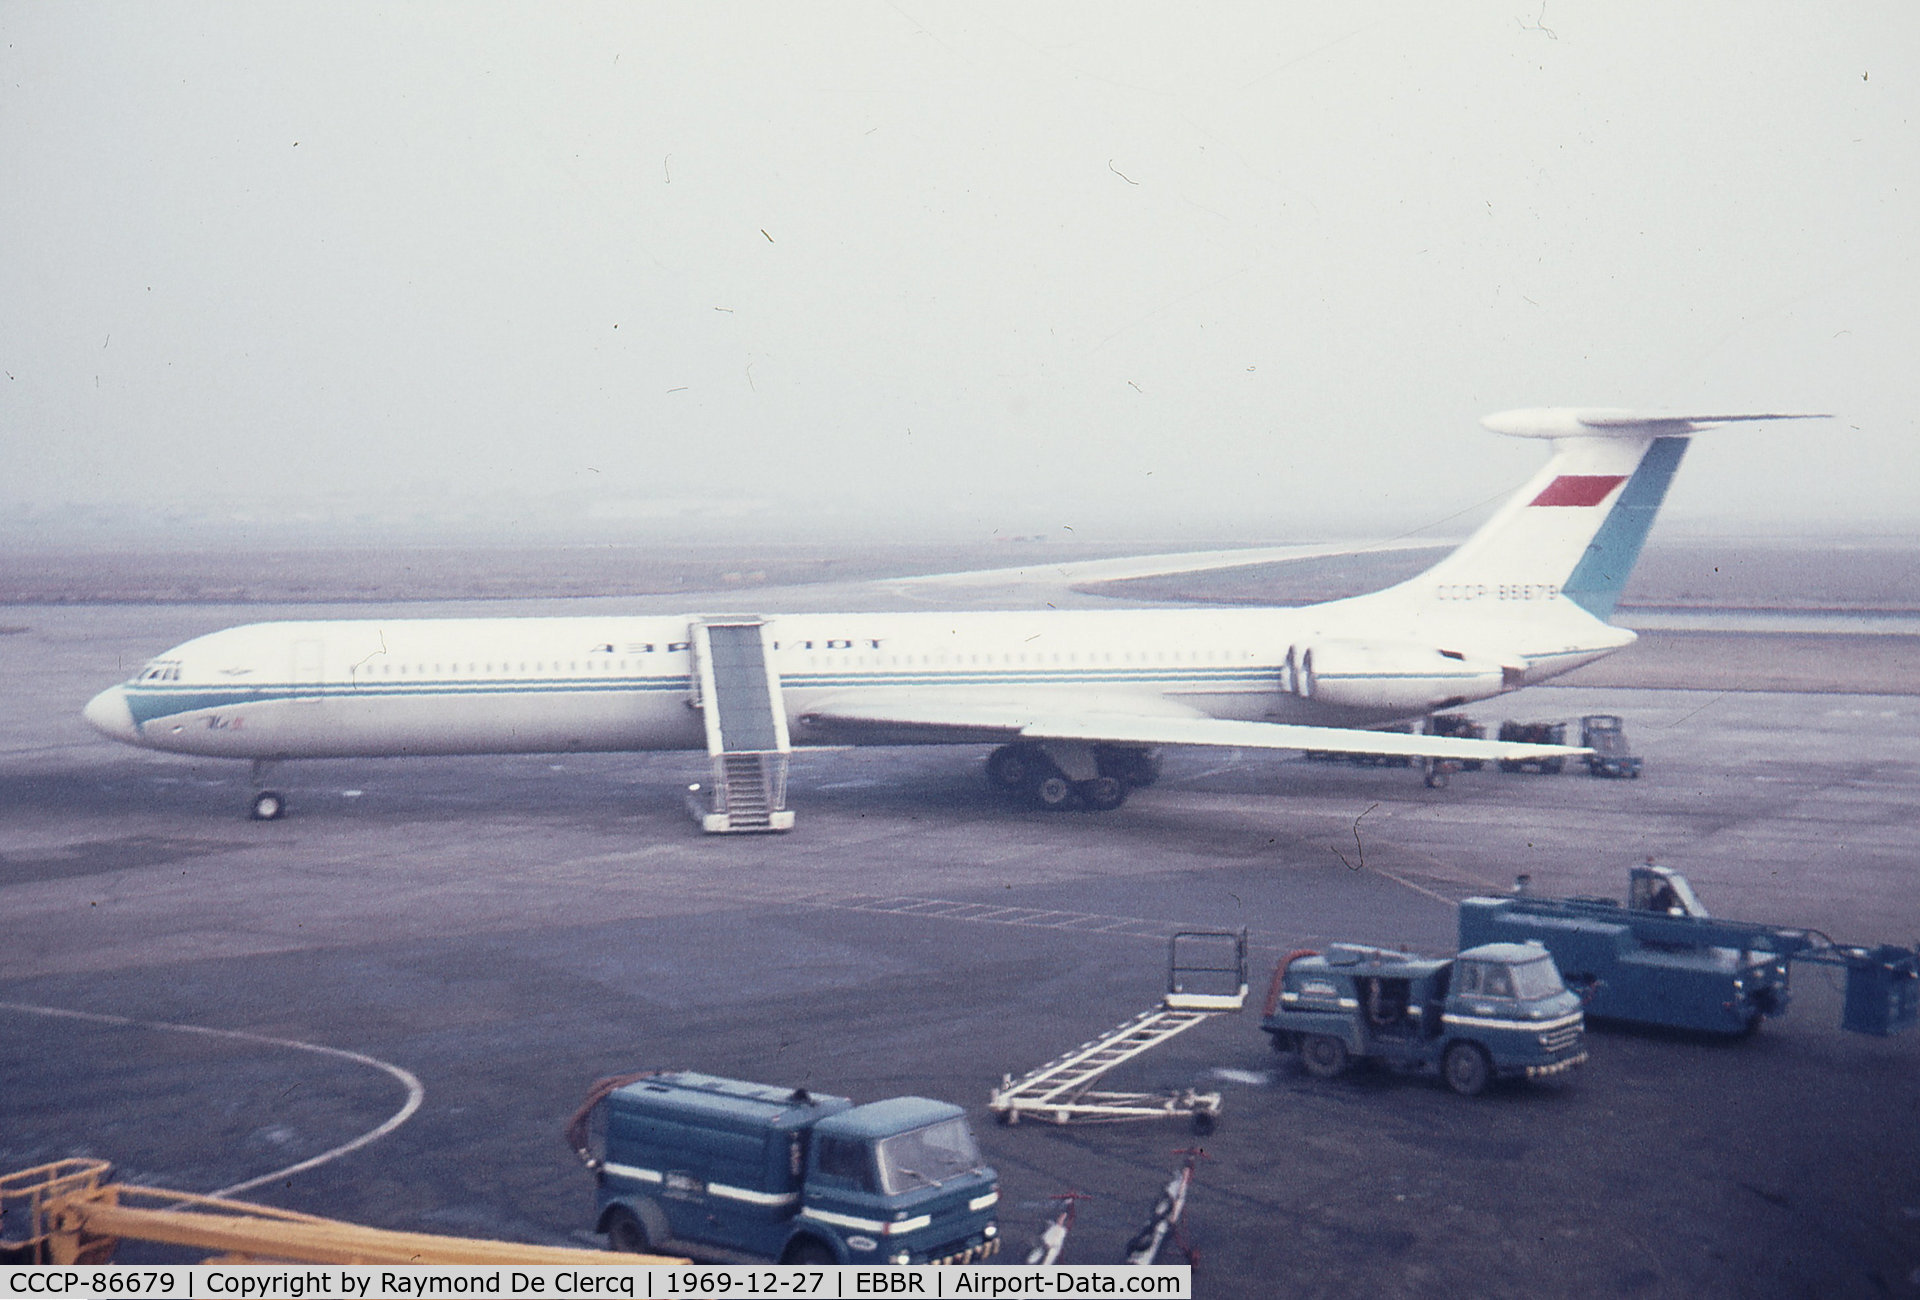 CCCP-86679, Ilyushin IL-62 C/N 80404, At Brussels Airport on 27-12-1969.